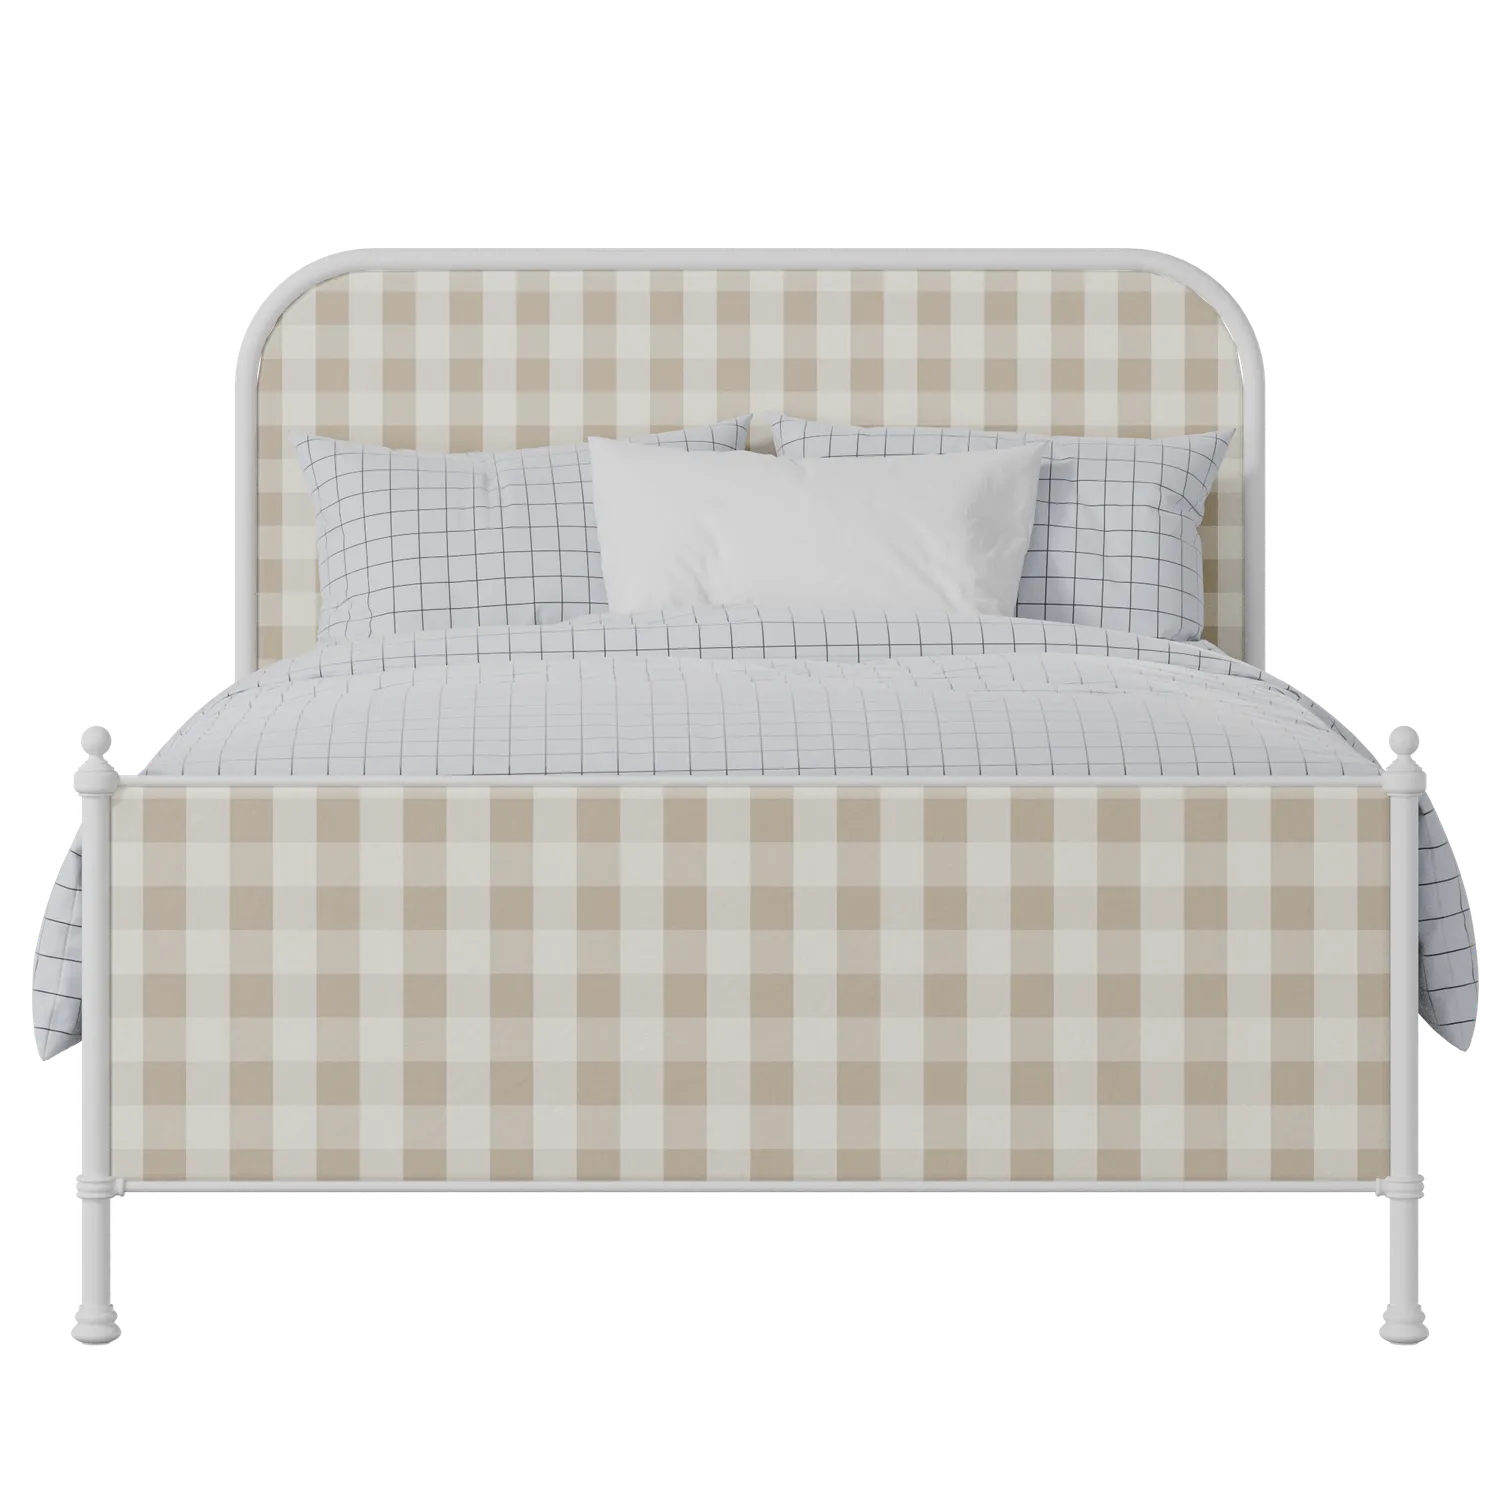 Bray iron/metal upholstered bed in white with grey fabric